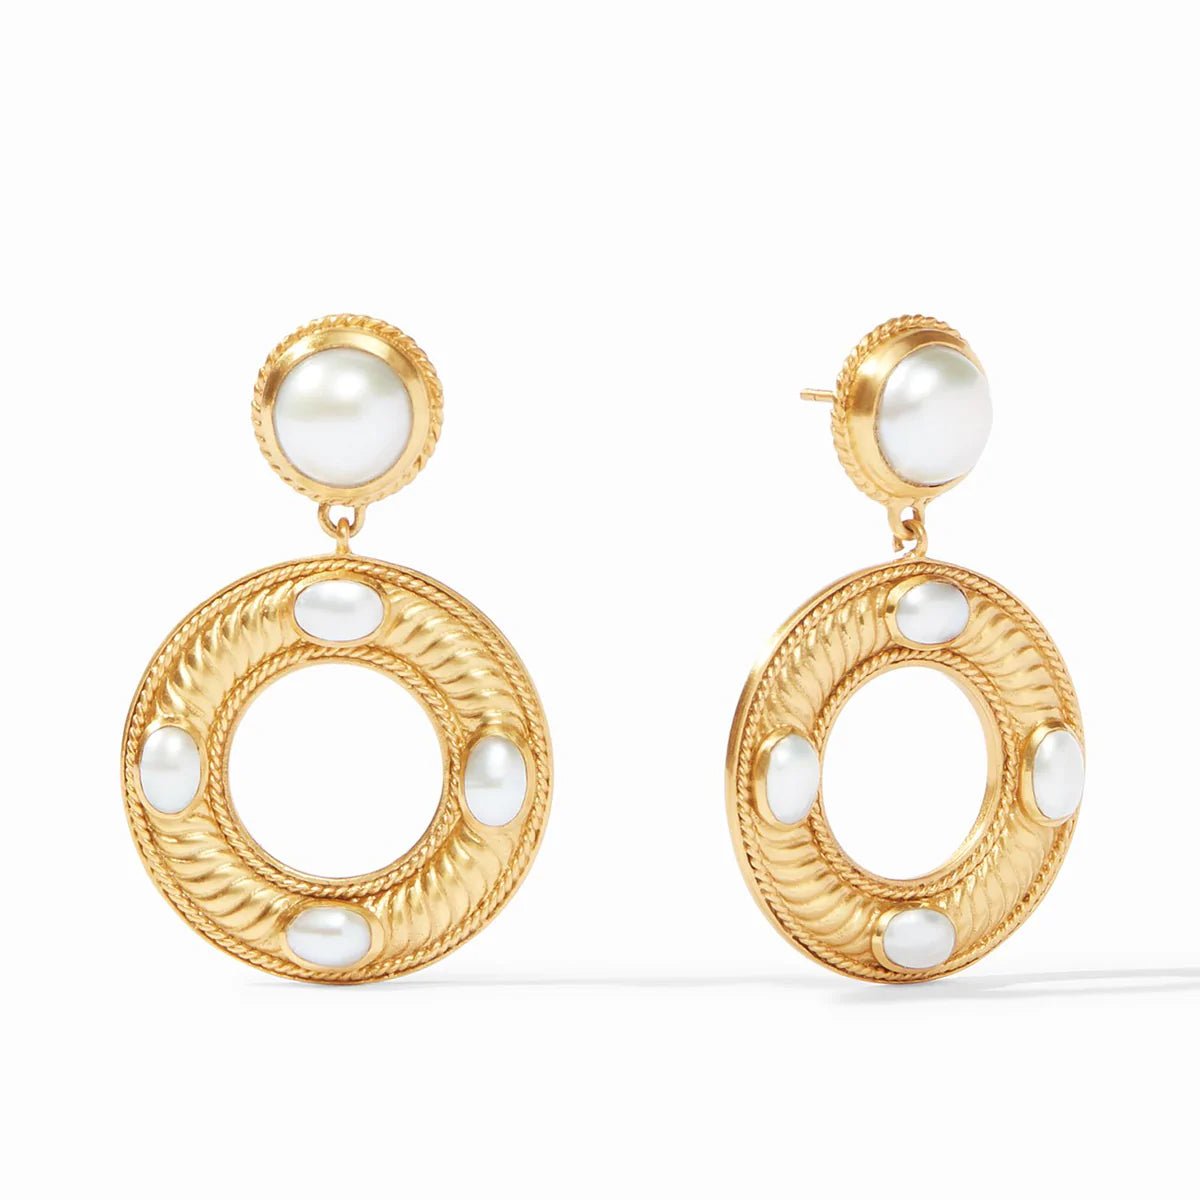 Olympia Statement Earring - Gaines Jewelers